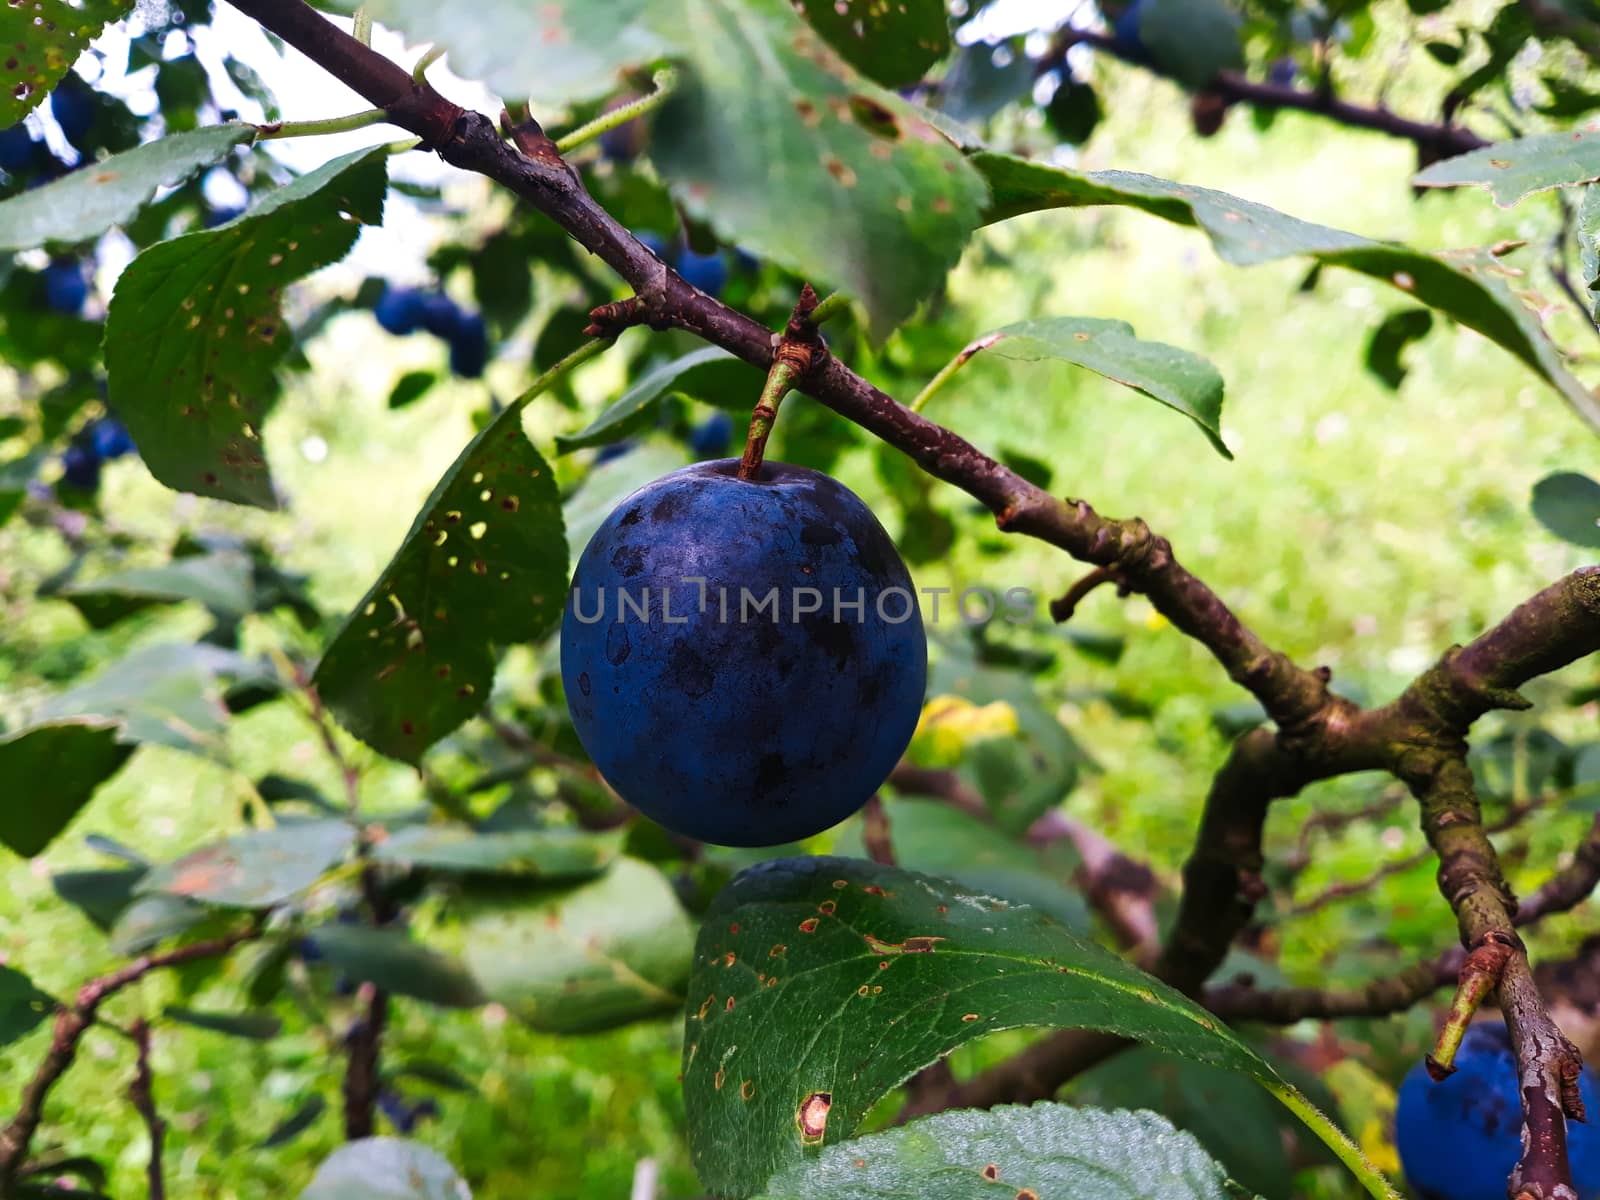 One ripe plum on a branch. Beautiful blue plum on the branch by mahirrov